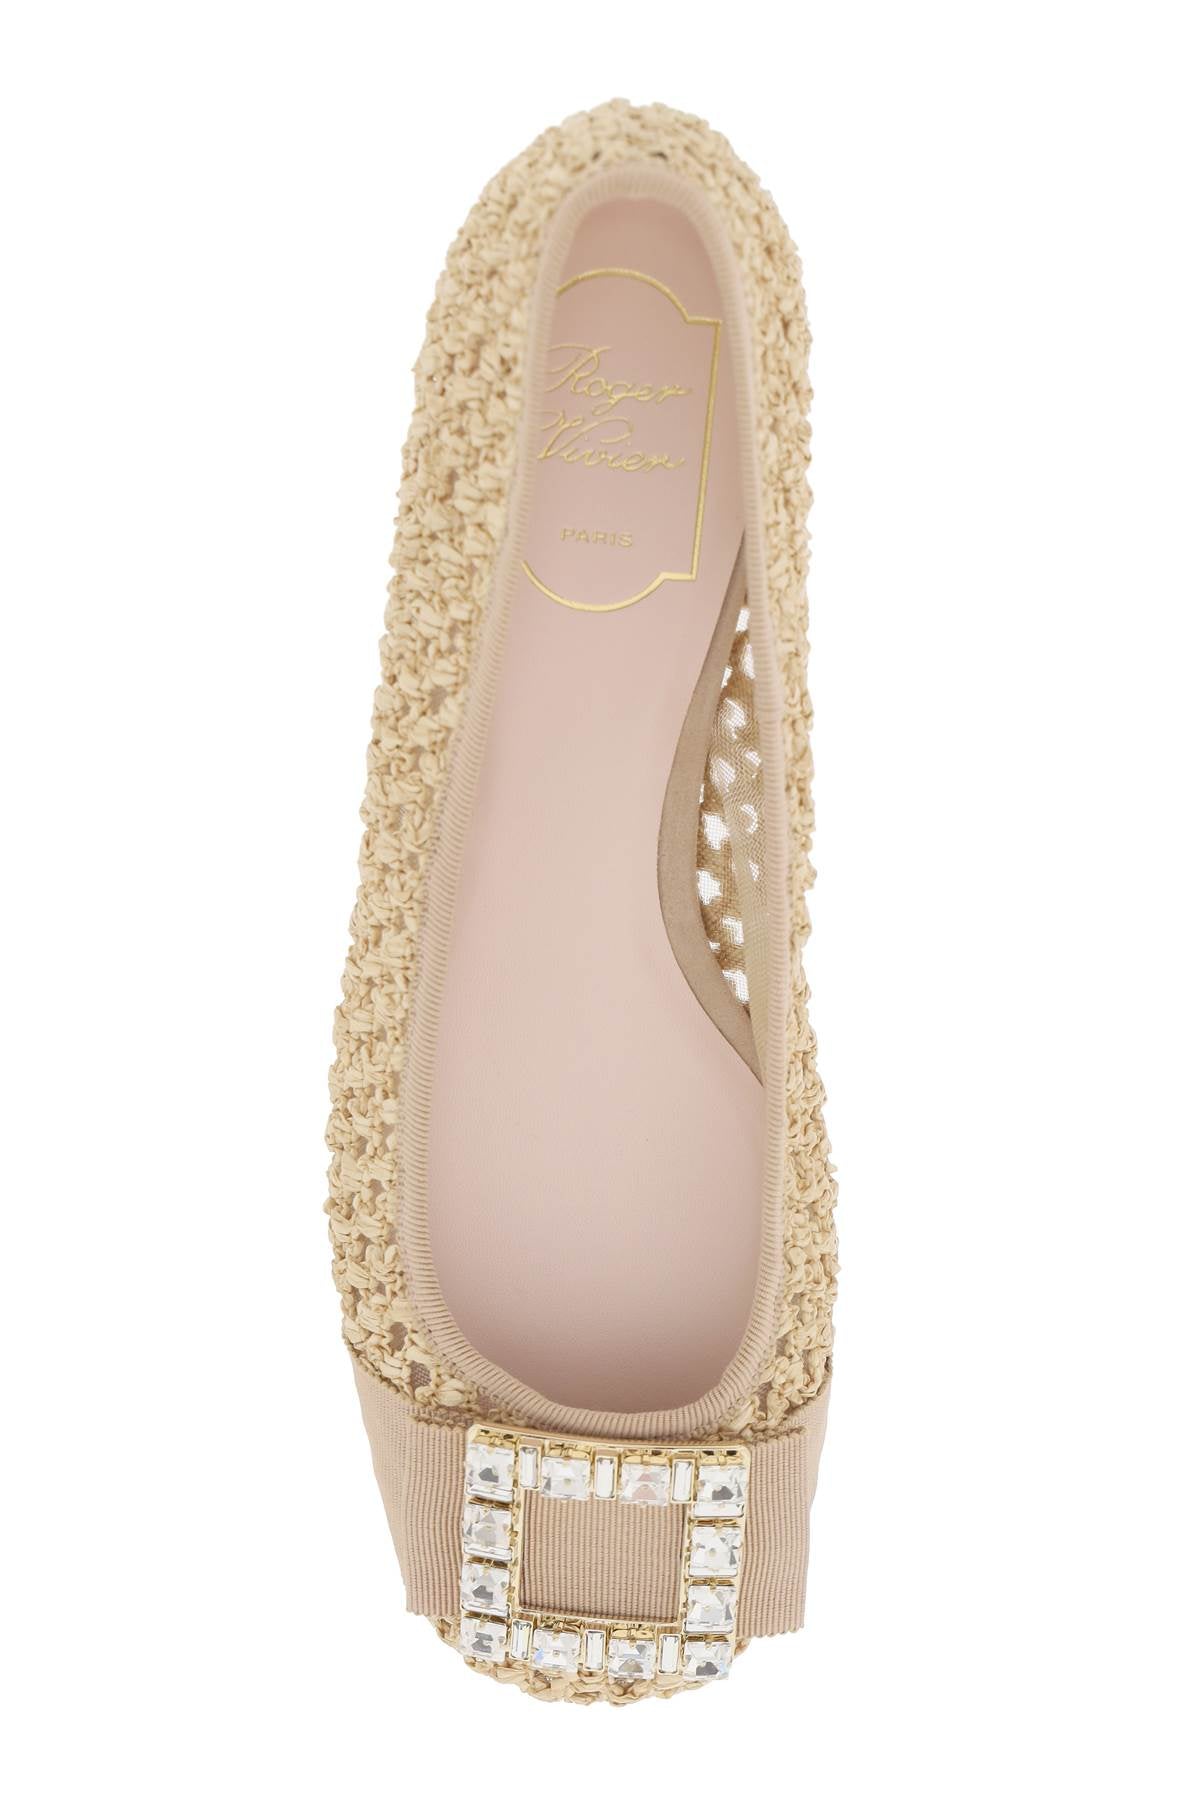 ROGER VIVIER Perforated Raffia Ballerina with Rhinestone Buckle for Women in Tan SS24